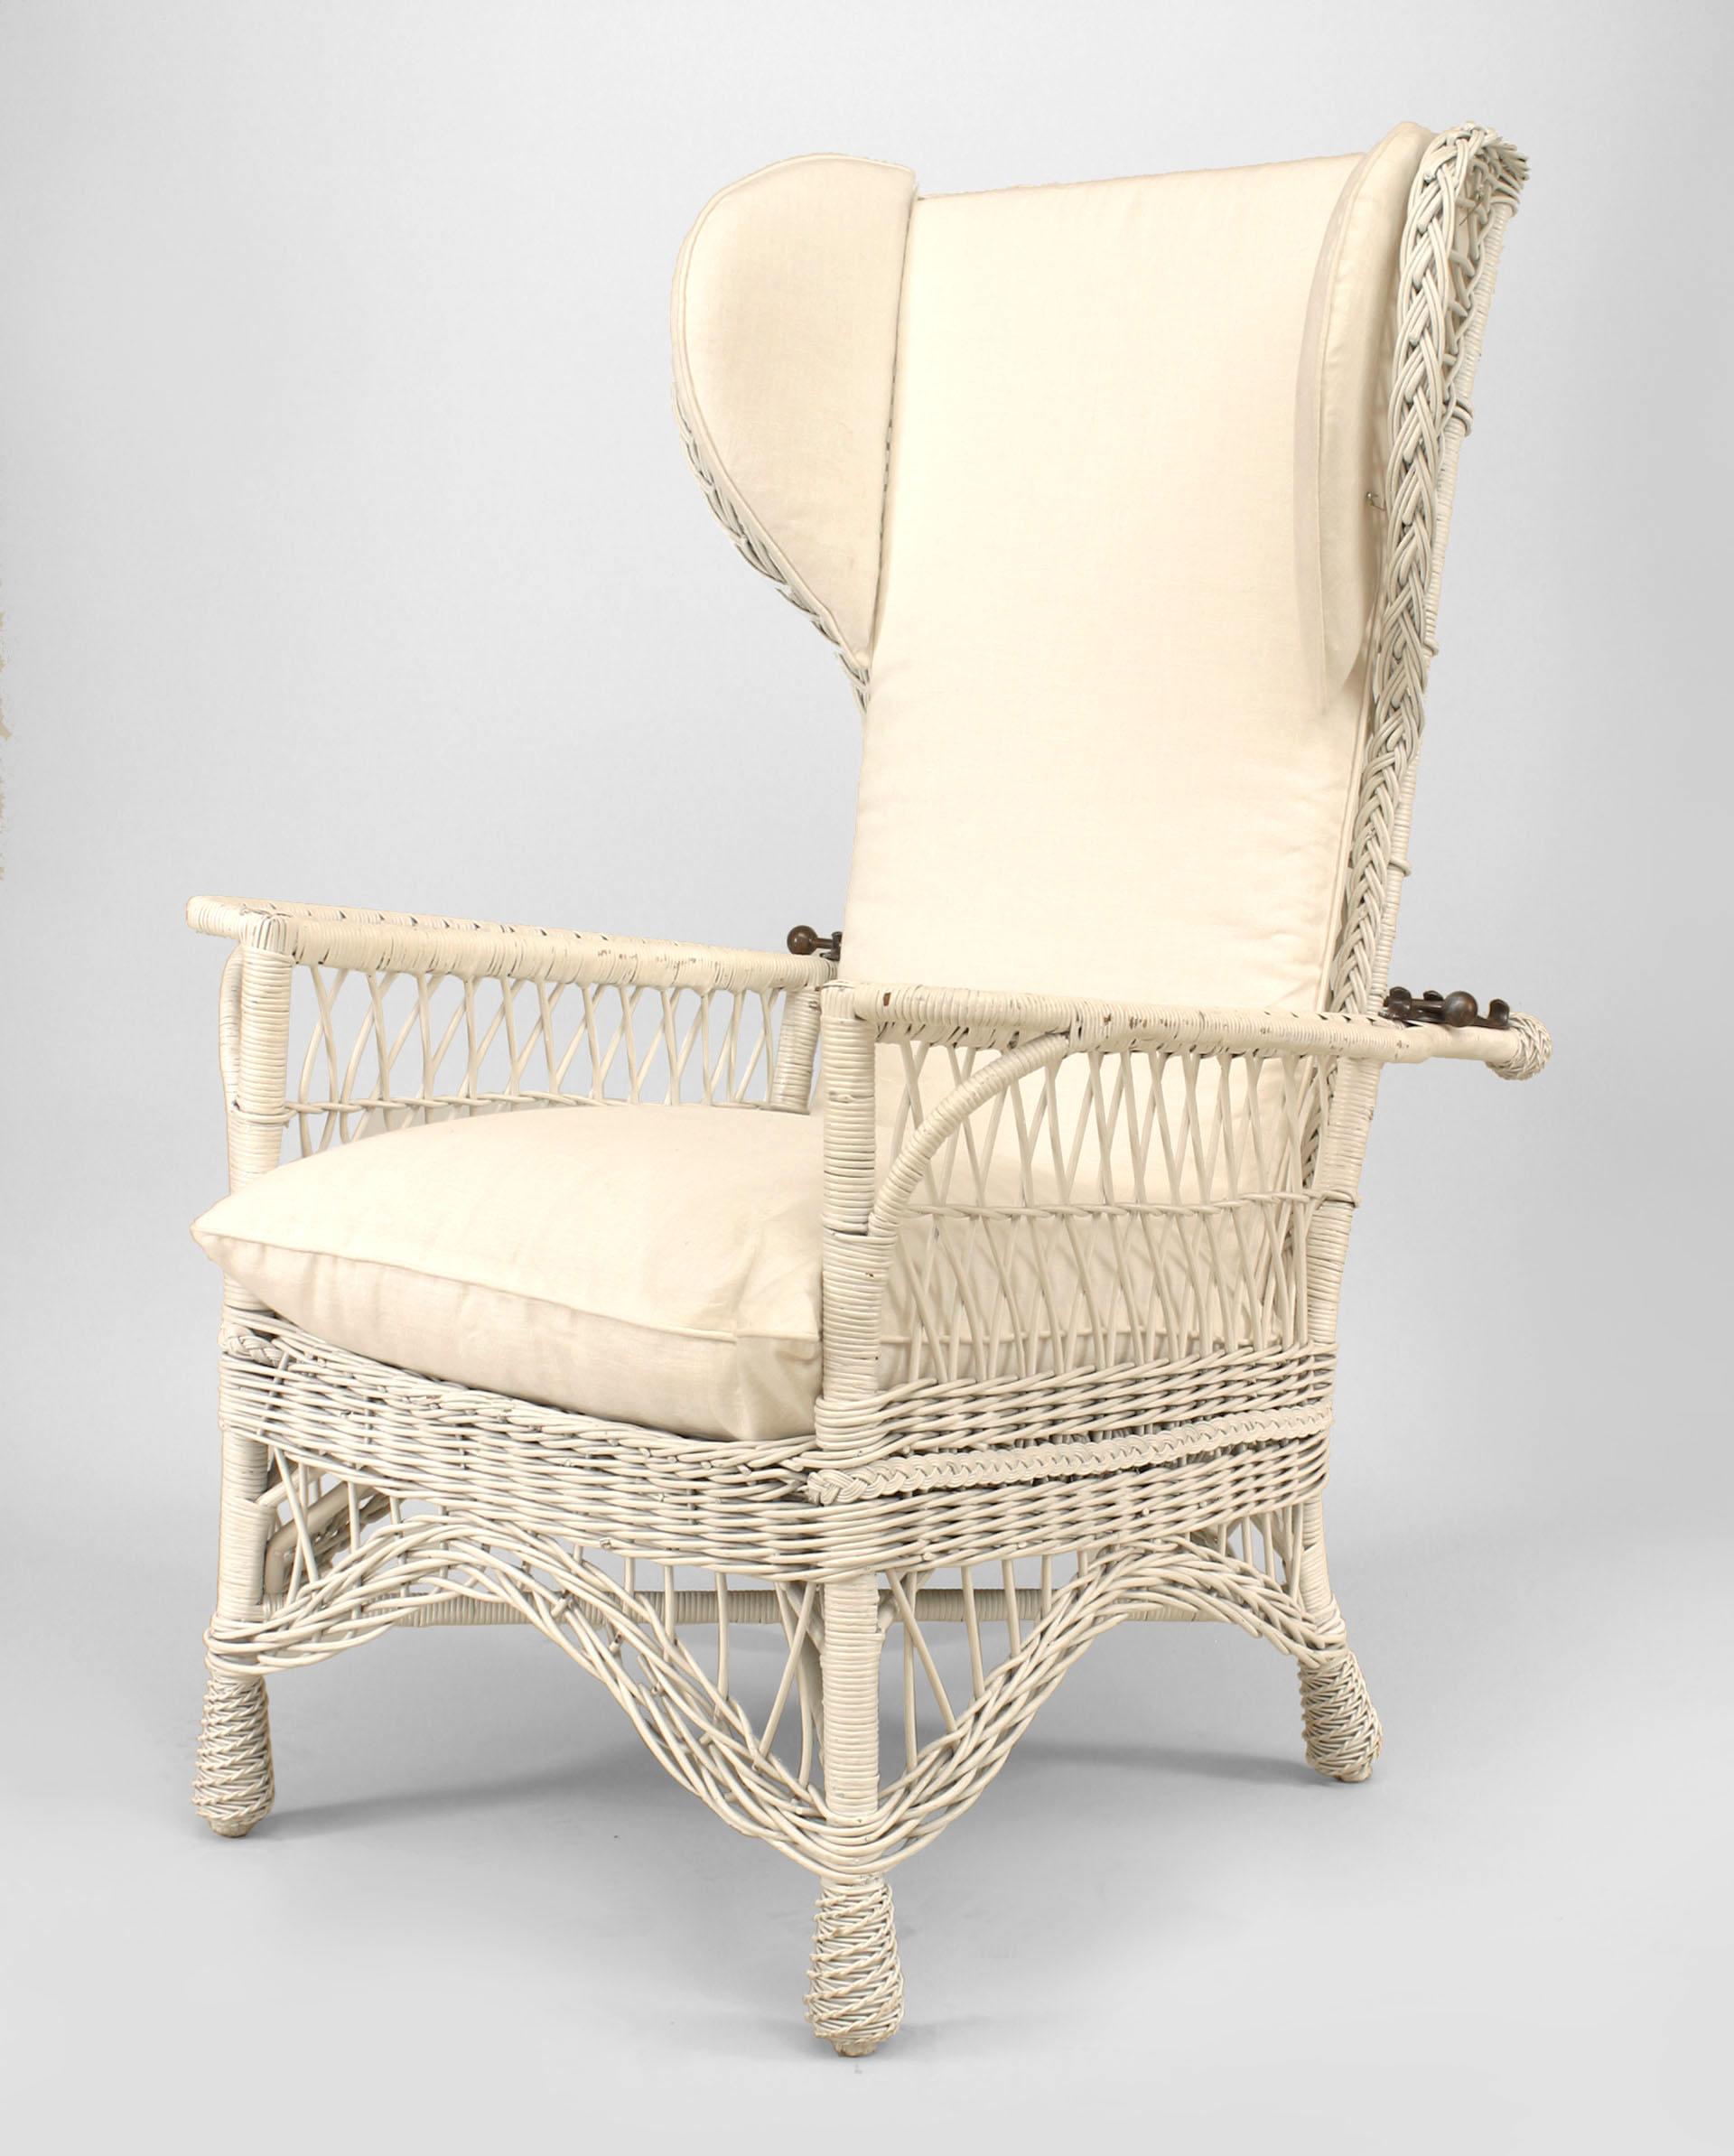 American Mission white painted wicker adjustable high back Morris chair with cushions.
